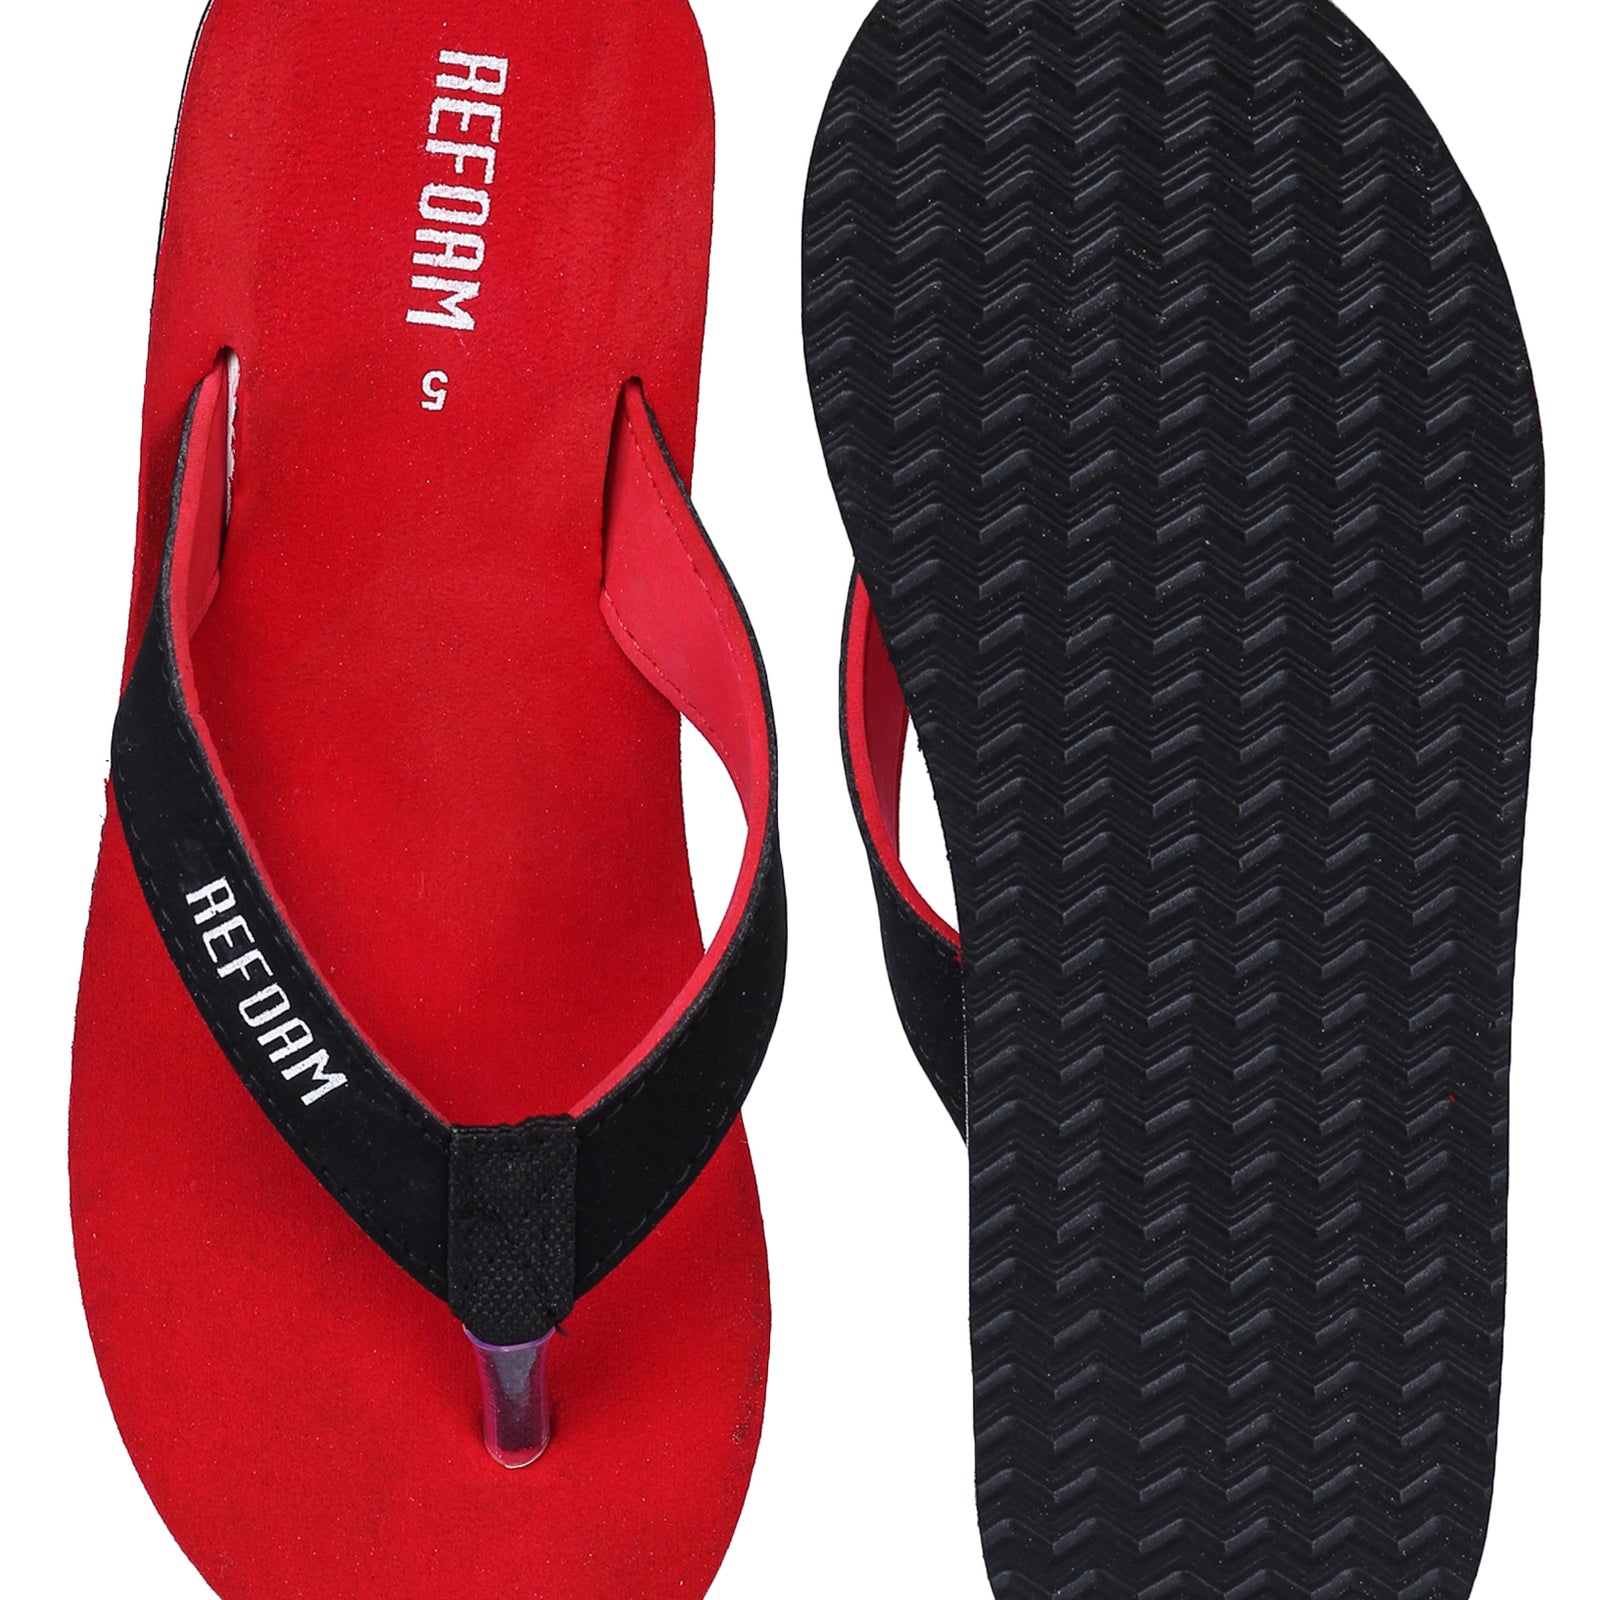 Red Solid Rubber Slip On Casual Slippers For Women